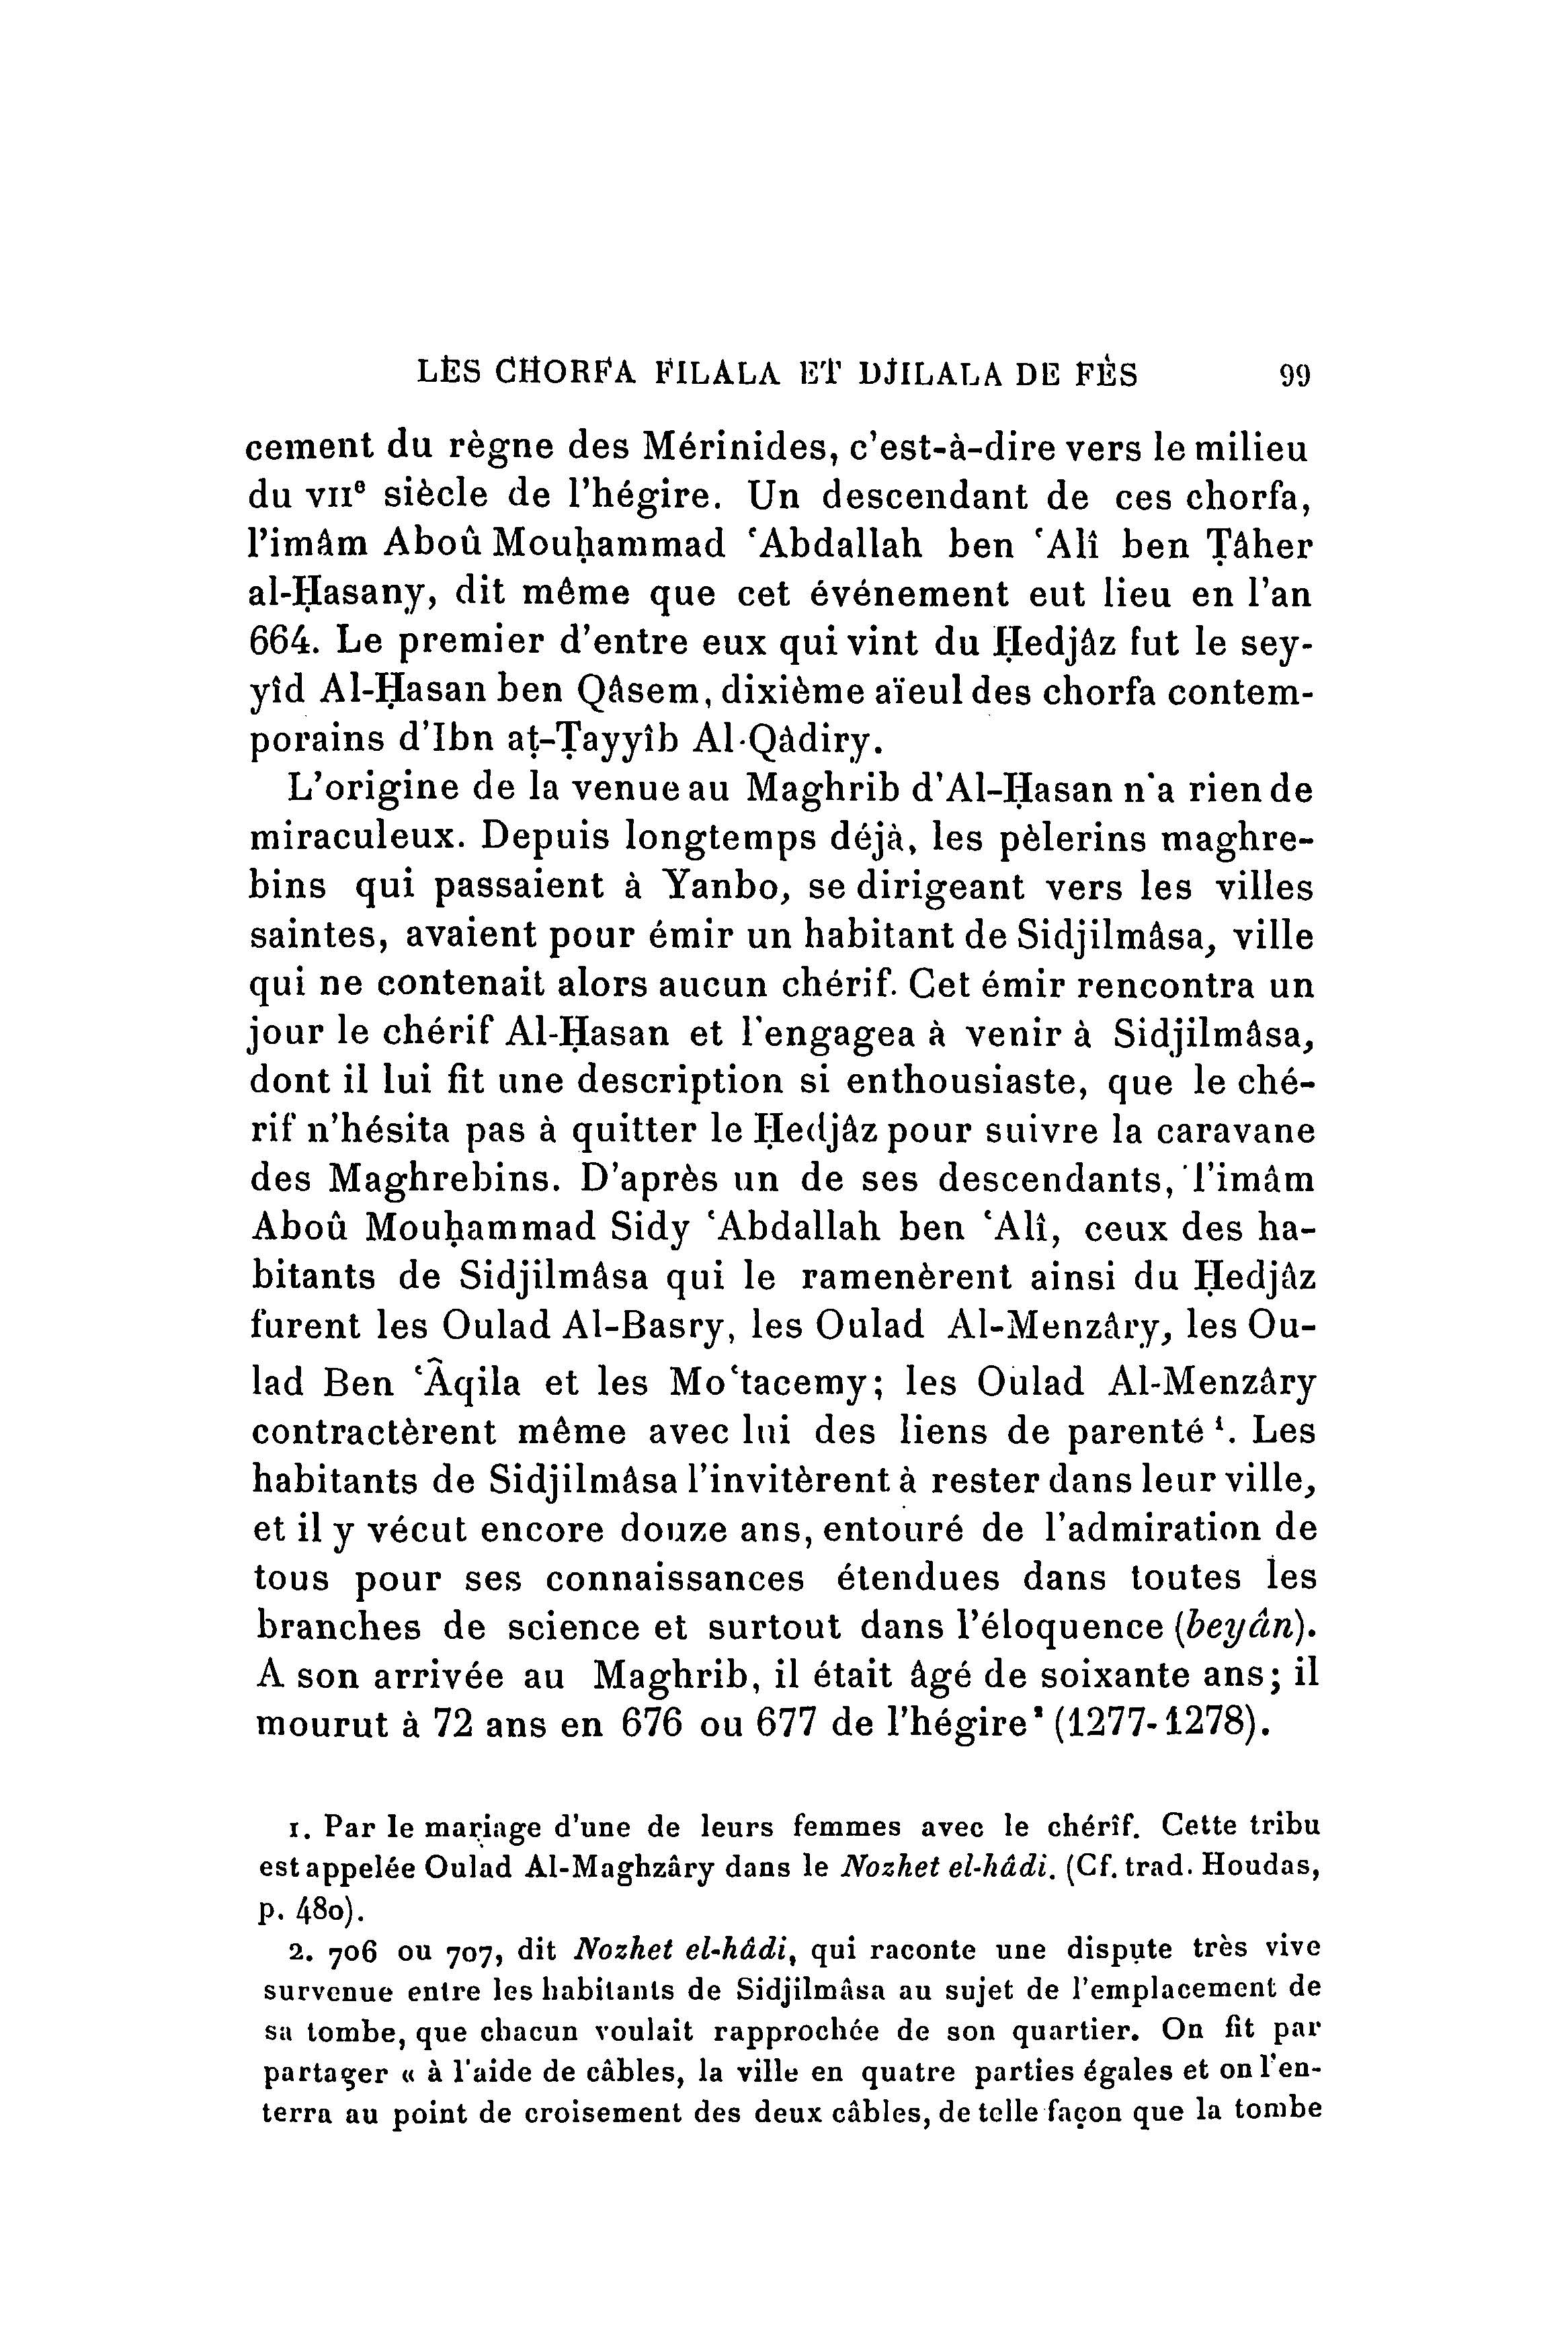 archives-marocaines-volume-03-1905_page_106